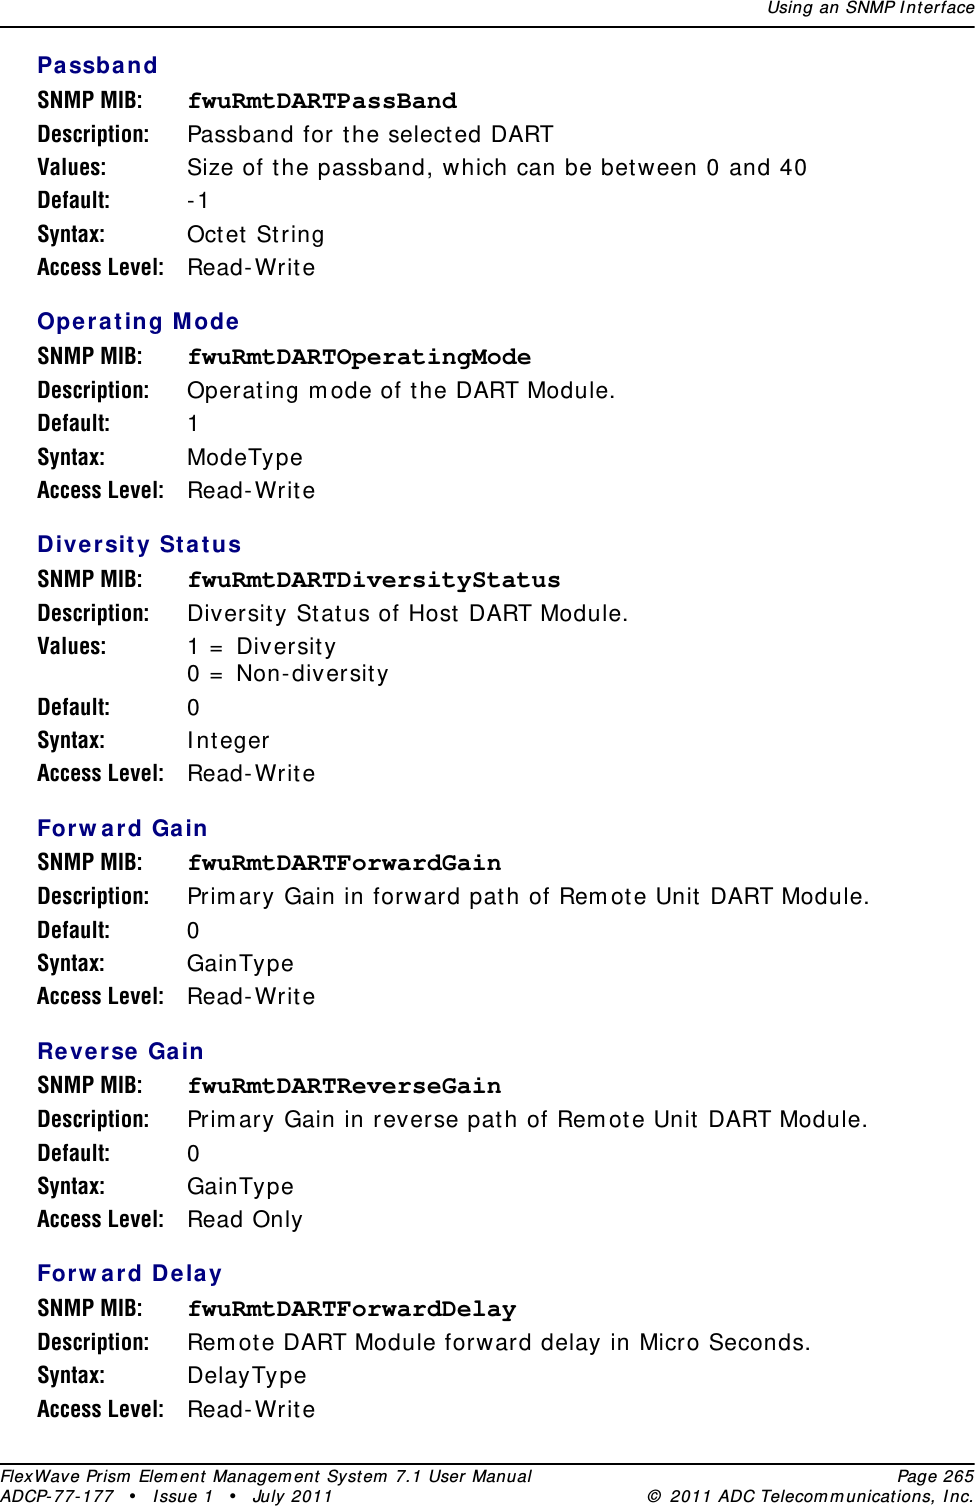 Using an SNMP I nt erfaceFlexWave Prism  Elem ent Managem ent  Syst em  7.1 User Manual Page 265ADCP- 77- 177  • I ssue 1 • July 2011 ©  2011 ADC Telecom m unicat ions, I nc.Pa ssbandSNMP MIB: fwuRmtDARTPassBandDescription: Passband for the select ed DARTValues: Size of t he passband, which can be bet ween 0 and 40Default: - 1Syntax: Oct et StringAccess Level: Read- Writ eOpe rating ModeSNMP MIB: fwuRmtDARTOperatingModeDescription: Operat ing m ode of t he DART Module.Default: 1Syntax: ModeTypeAccess Level: Read- Writ eDiversit y St a t usSNMP MIB: fwuRmtDARTDiversityStatusDescription: Diversit y St atus of Host  DART Module.Values: 1 =  Diversit y 0 =  Non- diversit yDefault: 0Syntax: I ntegerAccess Level: Read- Writ eForw ard GainSNMP MIB: fwuRmtDARTForwardGainDescription: Prim ary Gain in forward path of Rem ot e Unit  DART Module.Default: 0Syntax: GainTypeAccess Level: Read- Writ eReverse GainSNMP MIB: fwuRmtDARTReverseGainDescription: Prim ary Gain in reverse pat h of Rem ot e Unit  DART Module.Default: 0Syntax: GainTypeAccess Level: Read OnlyForw ard Dela ySNMP MIB: fwuRmtDARTForwardDelayDescription: Rem ot e DART Module forward delay in Micro Seconds.Syntax: DelayTypeAccess Level: Read- Writ e